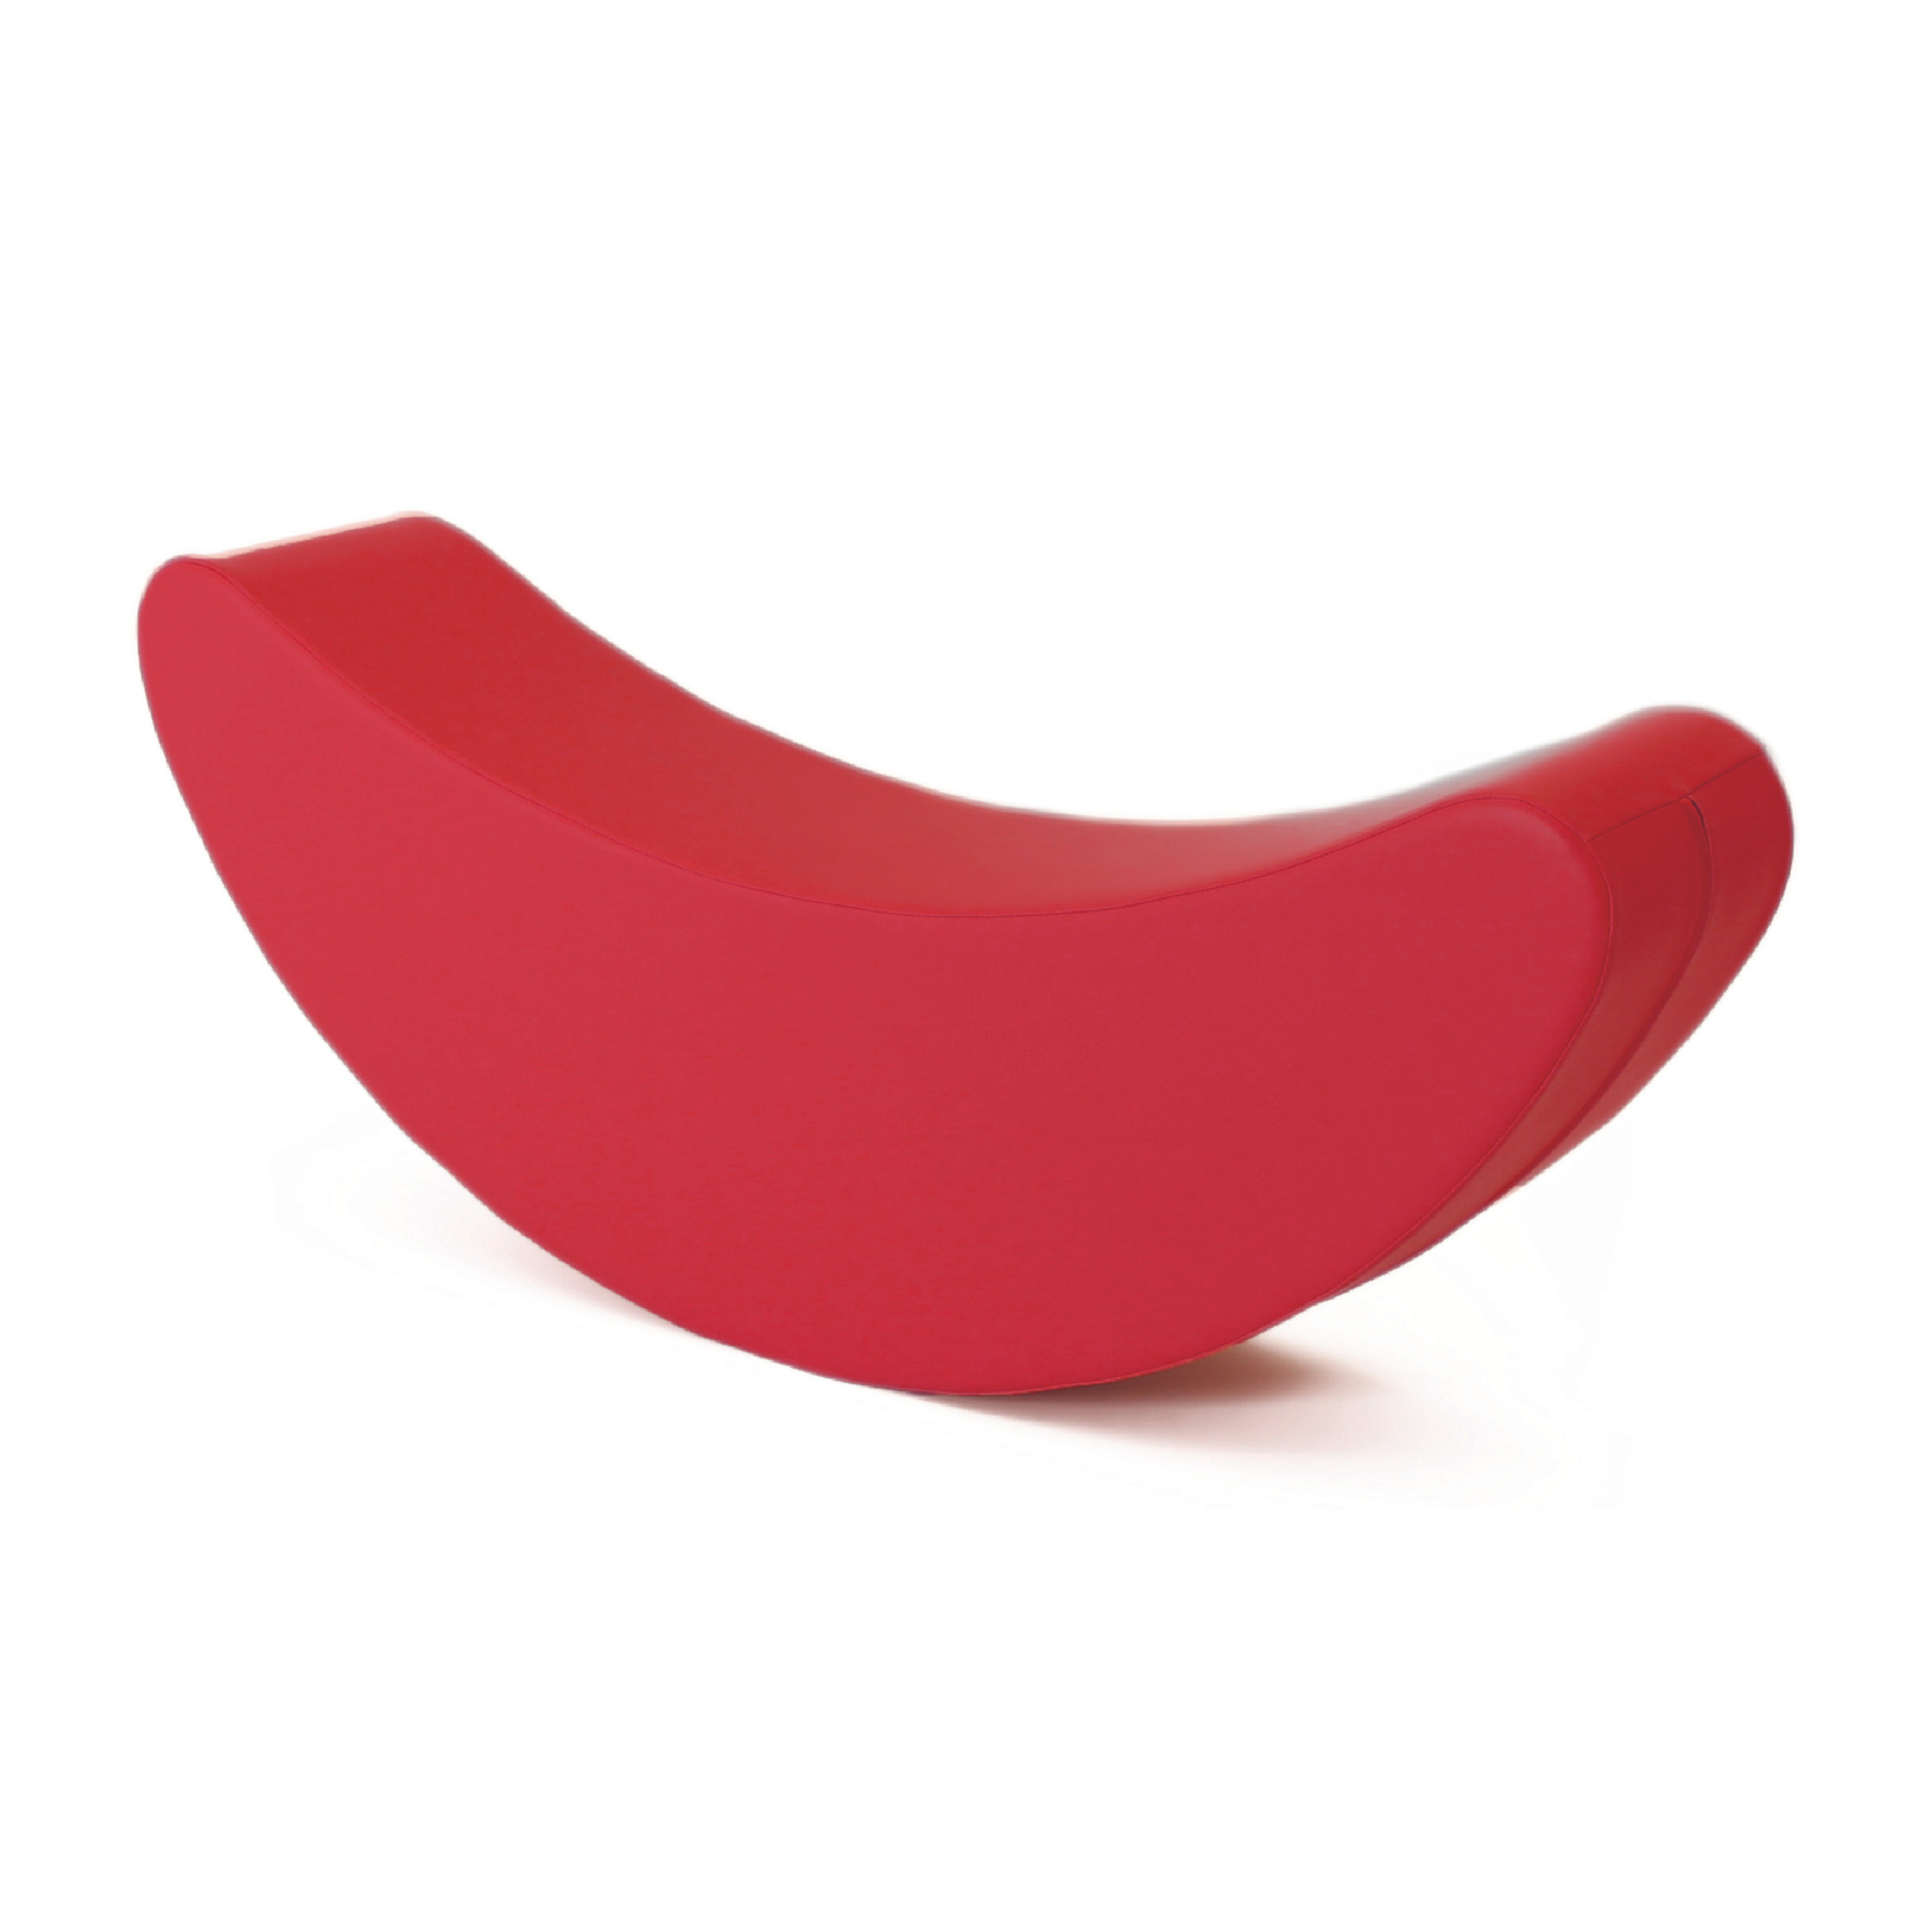 Bright red banana shaped rocking toy